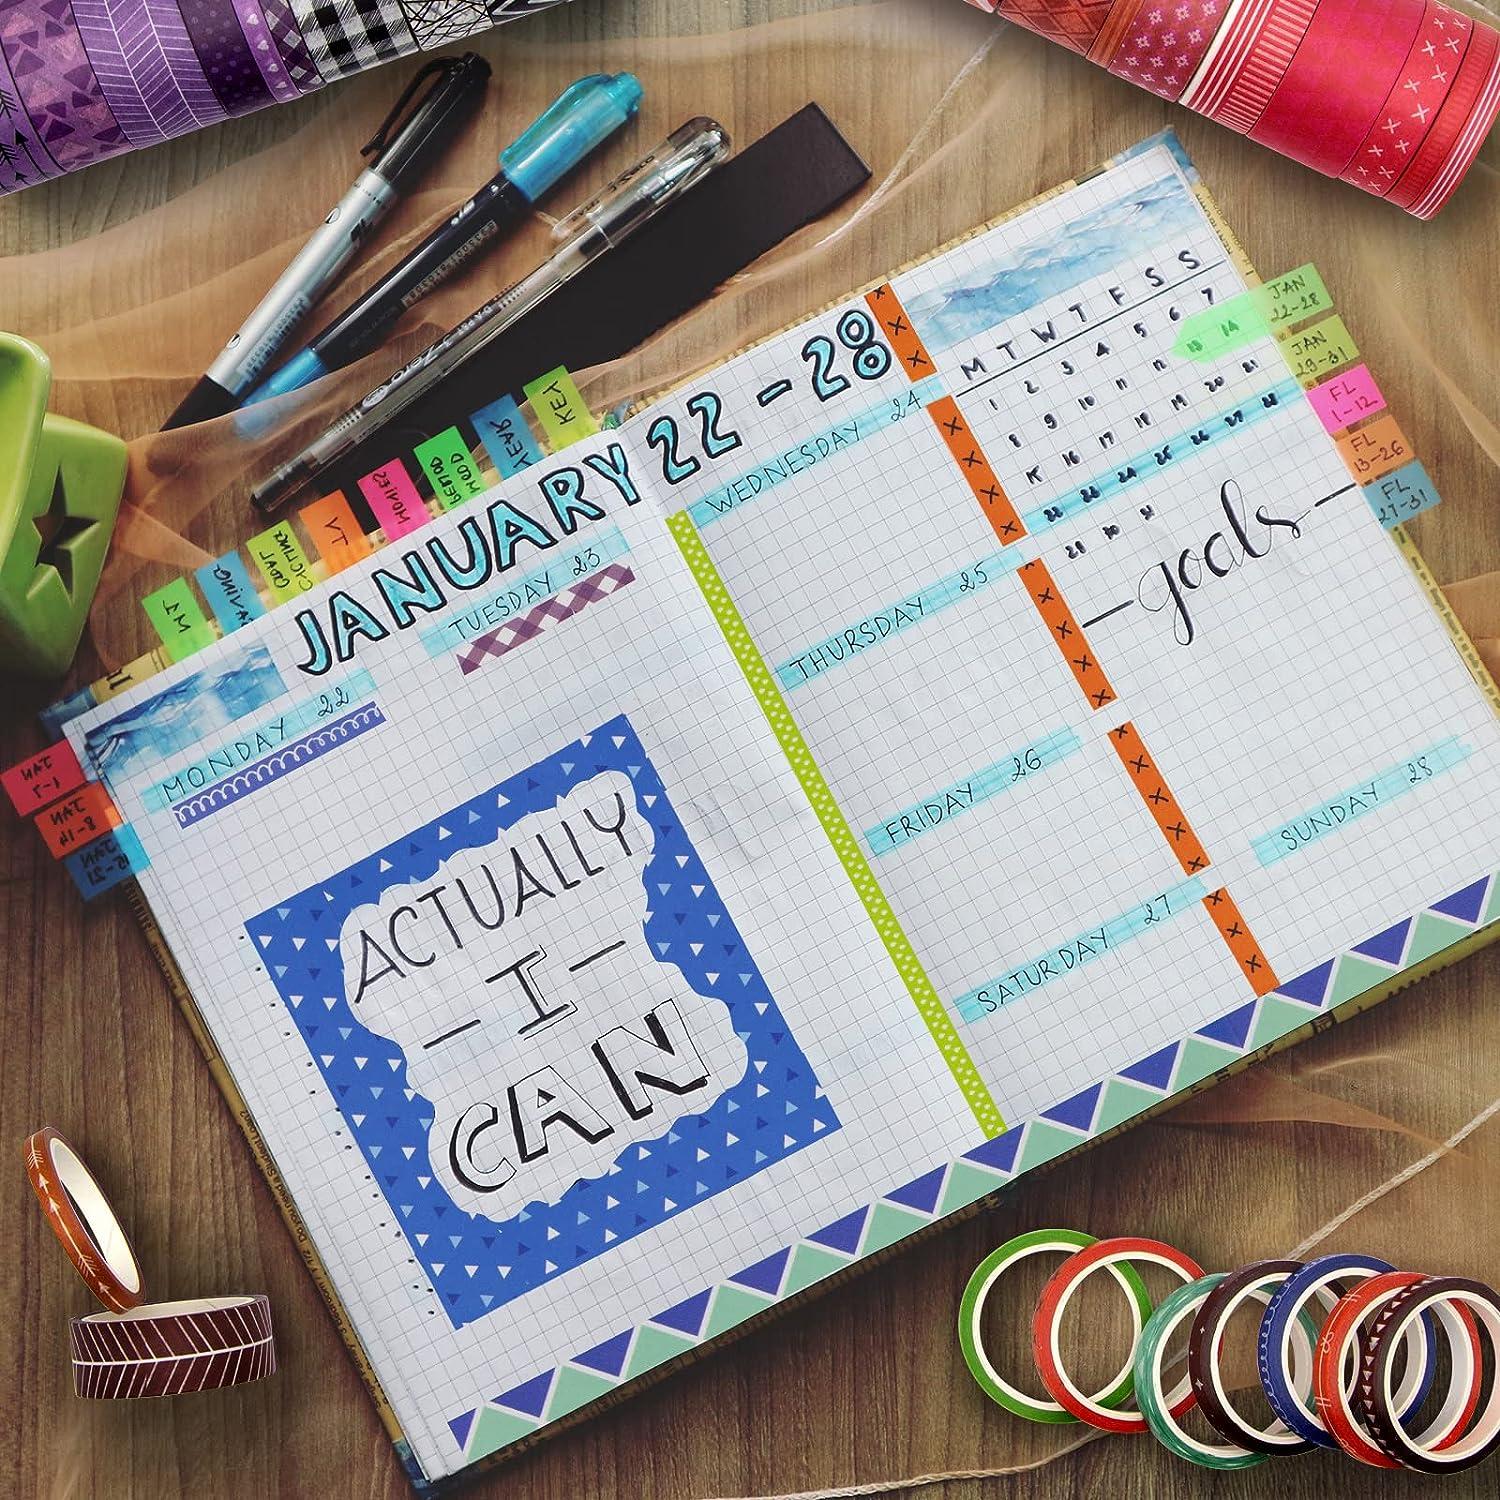 How to Decorate your Planner with Washi Tape - Curtains are Open